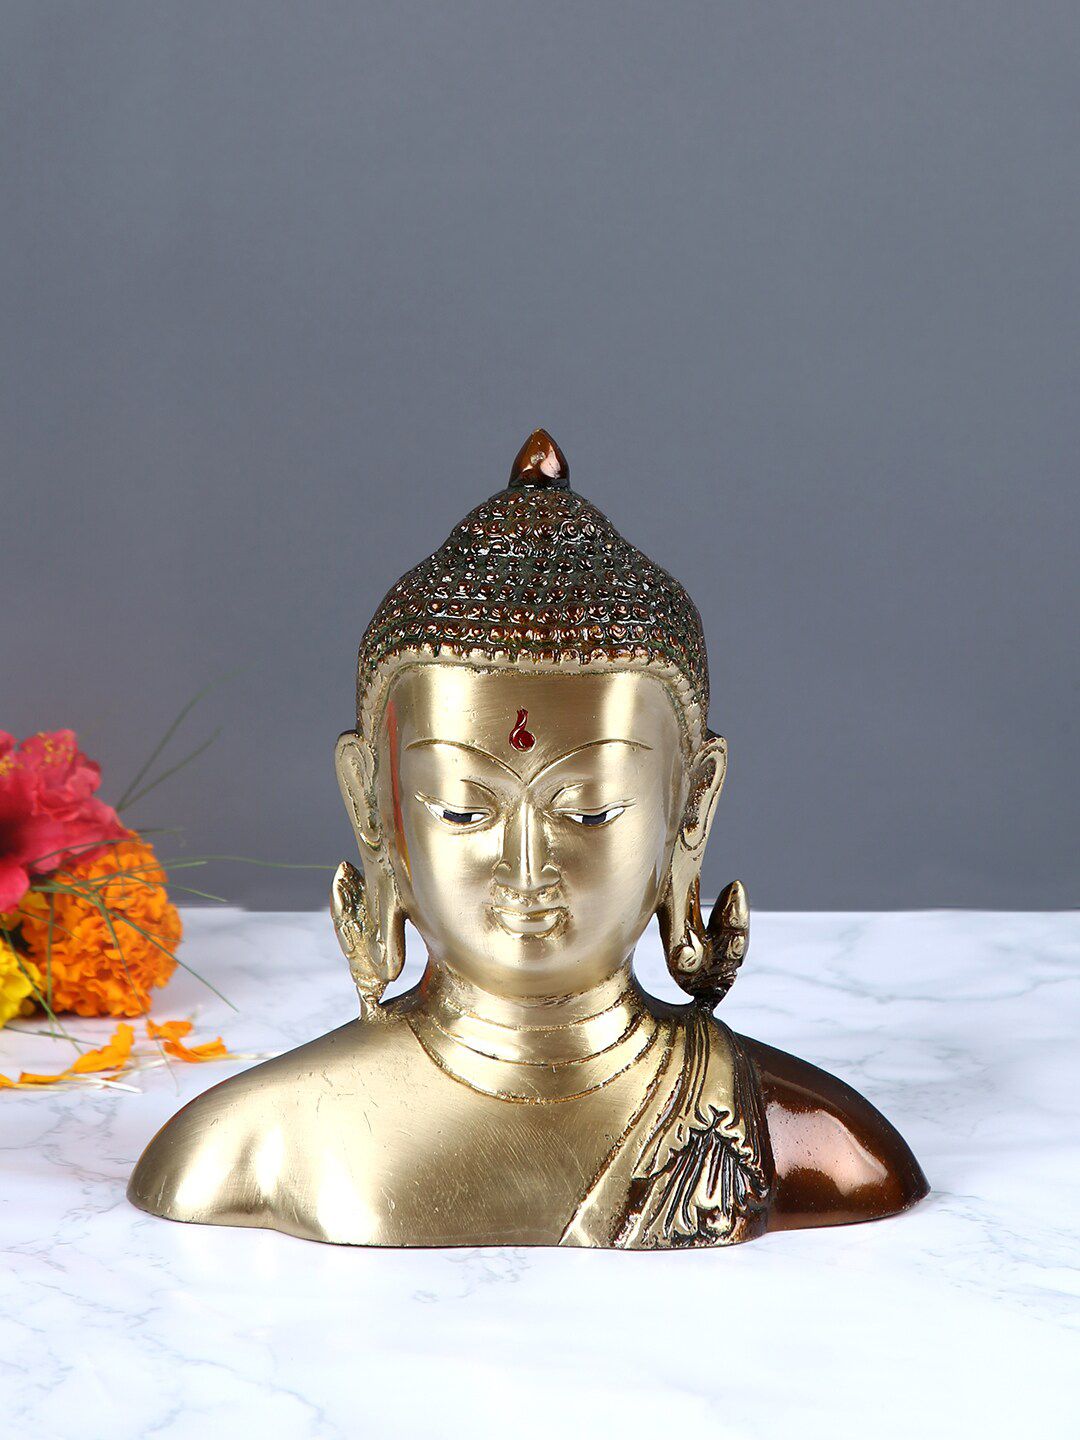 Aapno Rajasthan Brown & Gold-Toned Buddha Head Brass Statue Showpiece Price in India